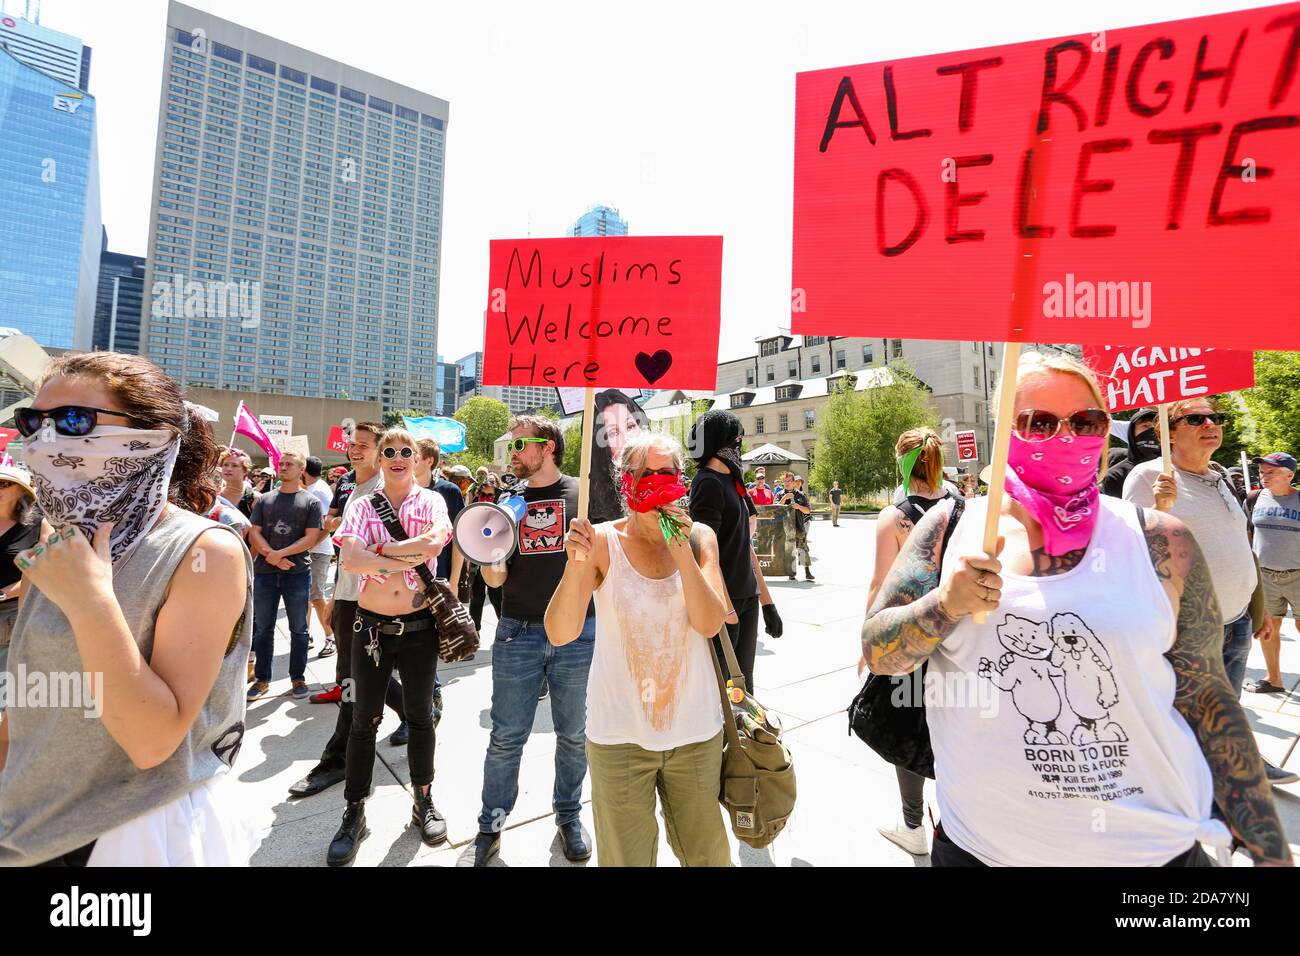 Protesters holding placards saying 'Alt right delete' and 'Muslims welcome here' during the demonstration.A 'Stop the Hate' rally was held by ANTIFA (Anti-Fascist) protesters at Nathan Phillip Square in opposition to WCAI (Worldwide Coalition Against Islam) Canada, a group that planed a protest on the same day. Stock Photo